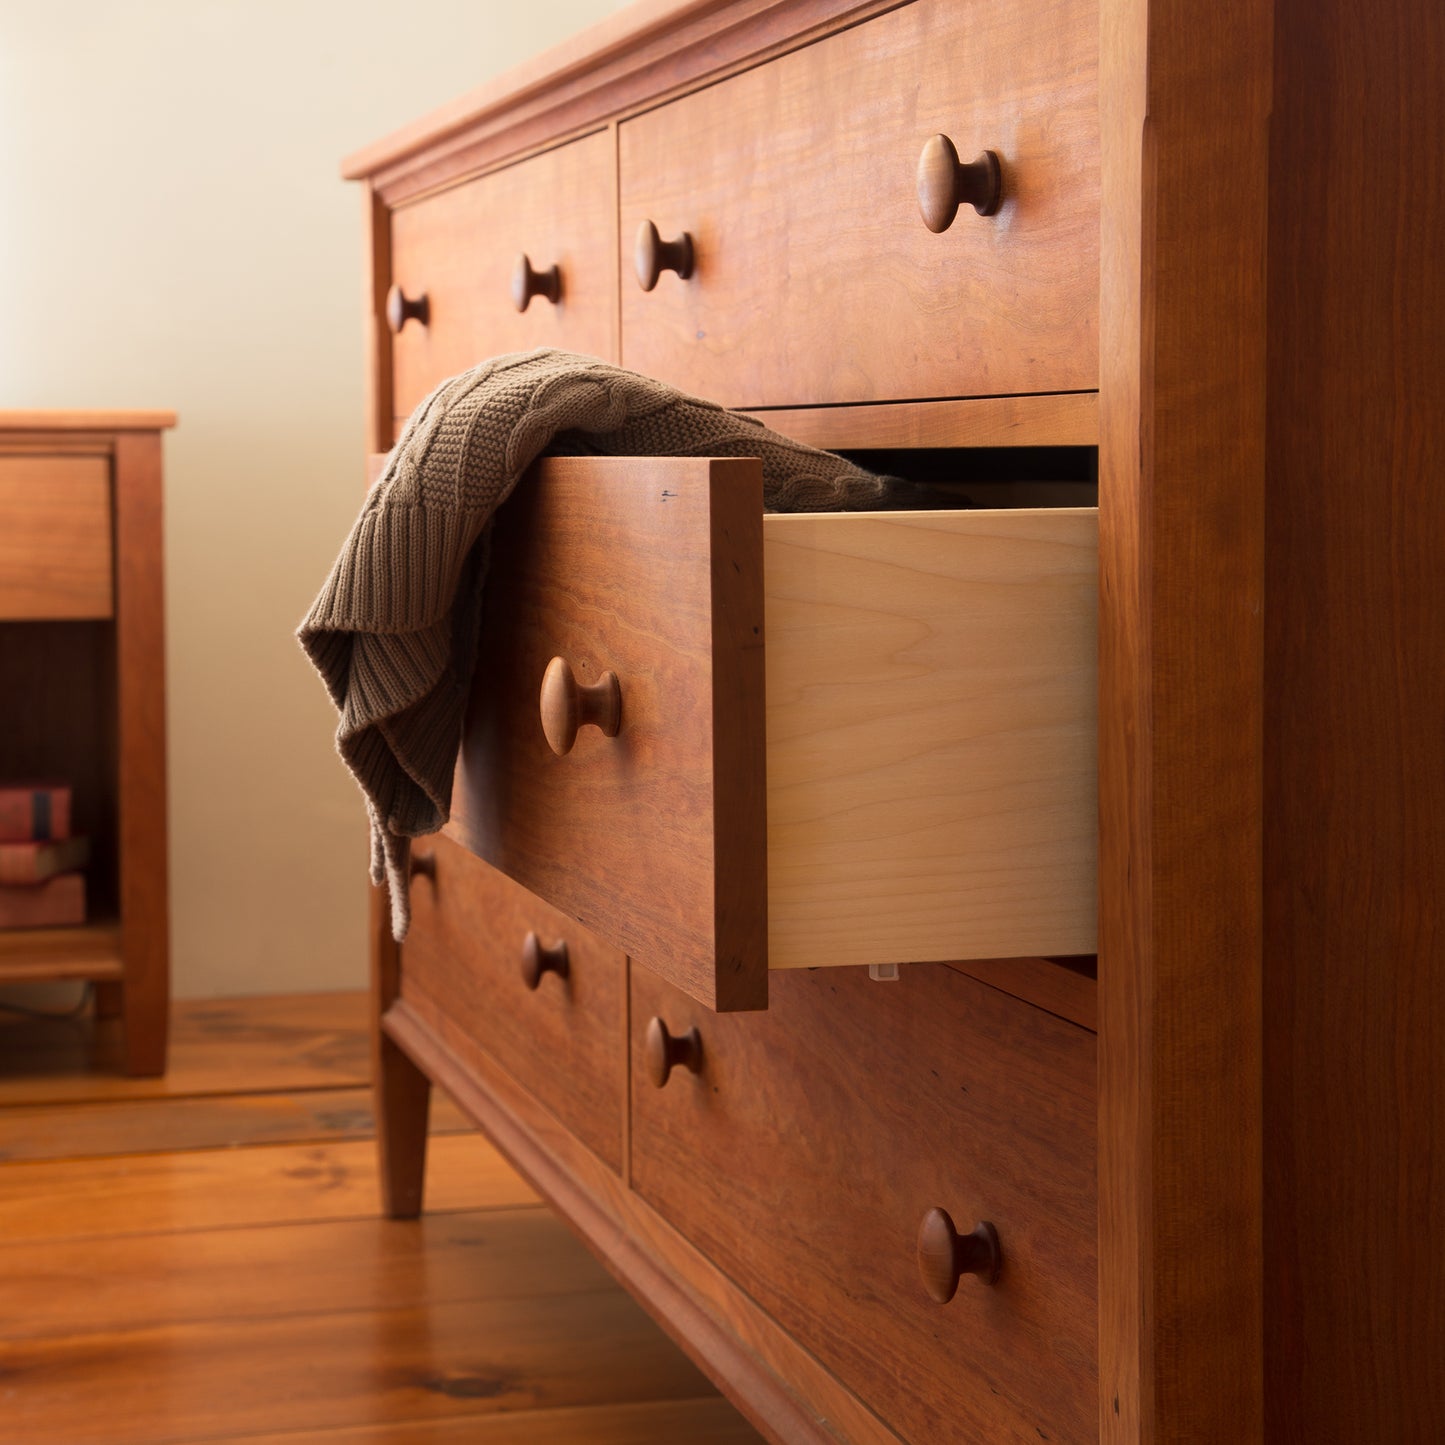 A wooden dresser with a drawer open.